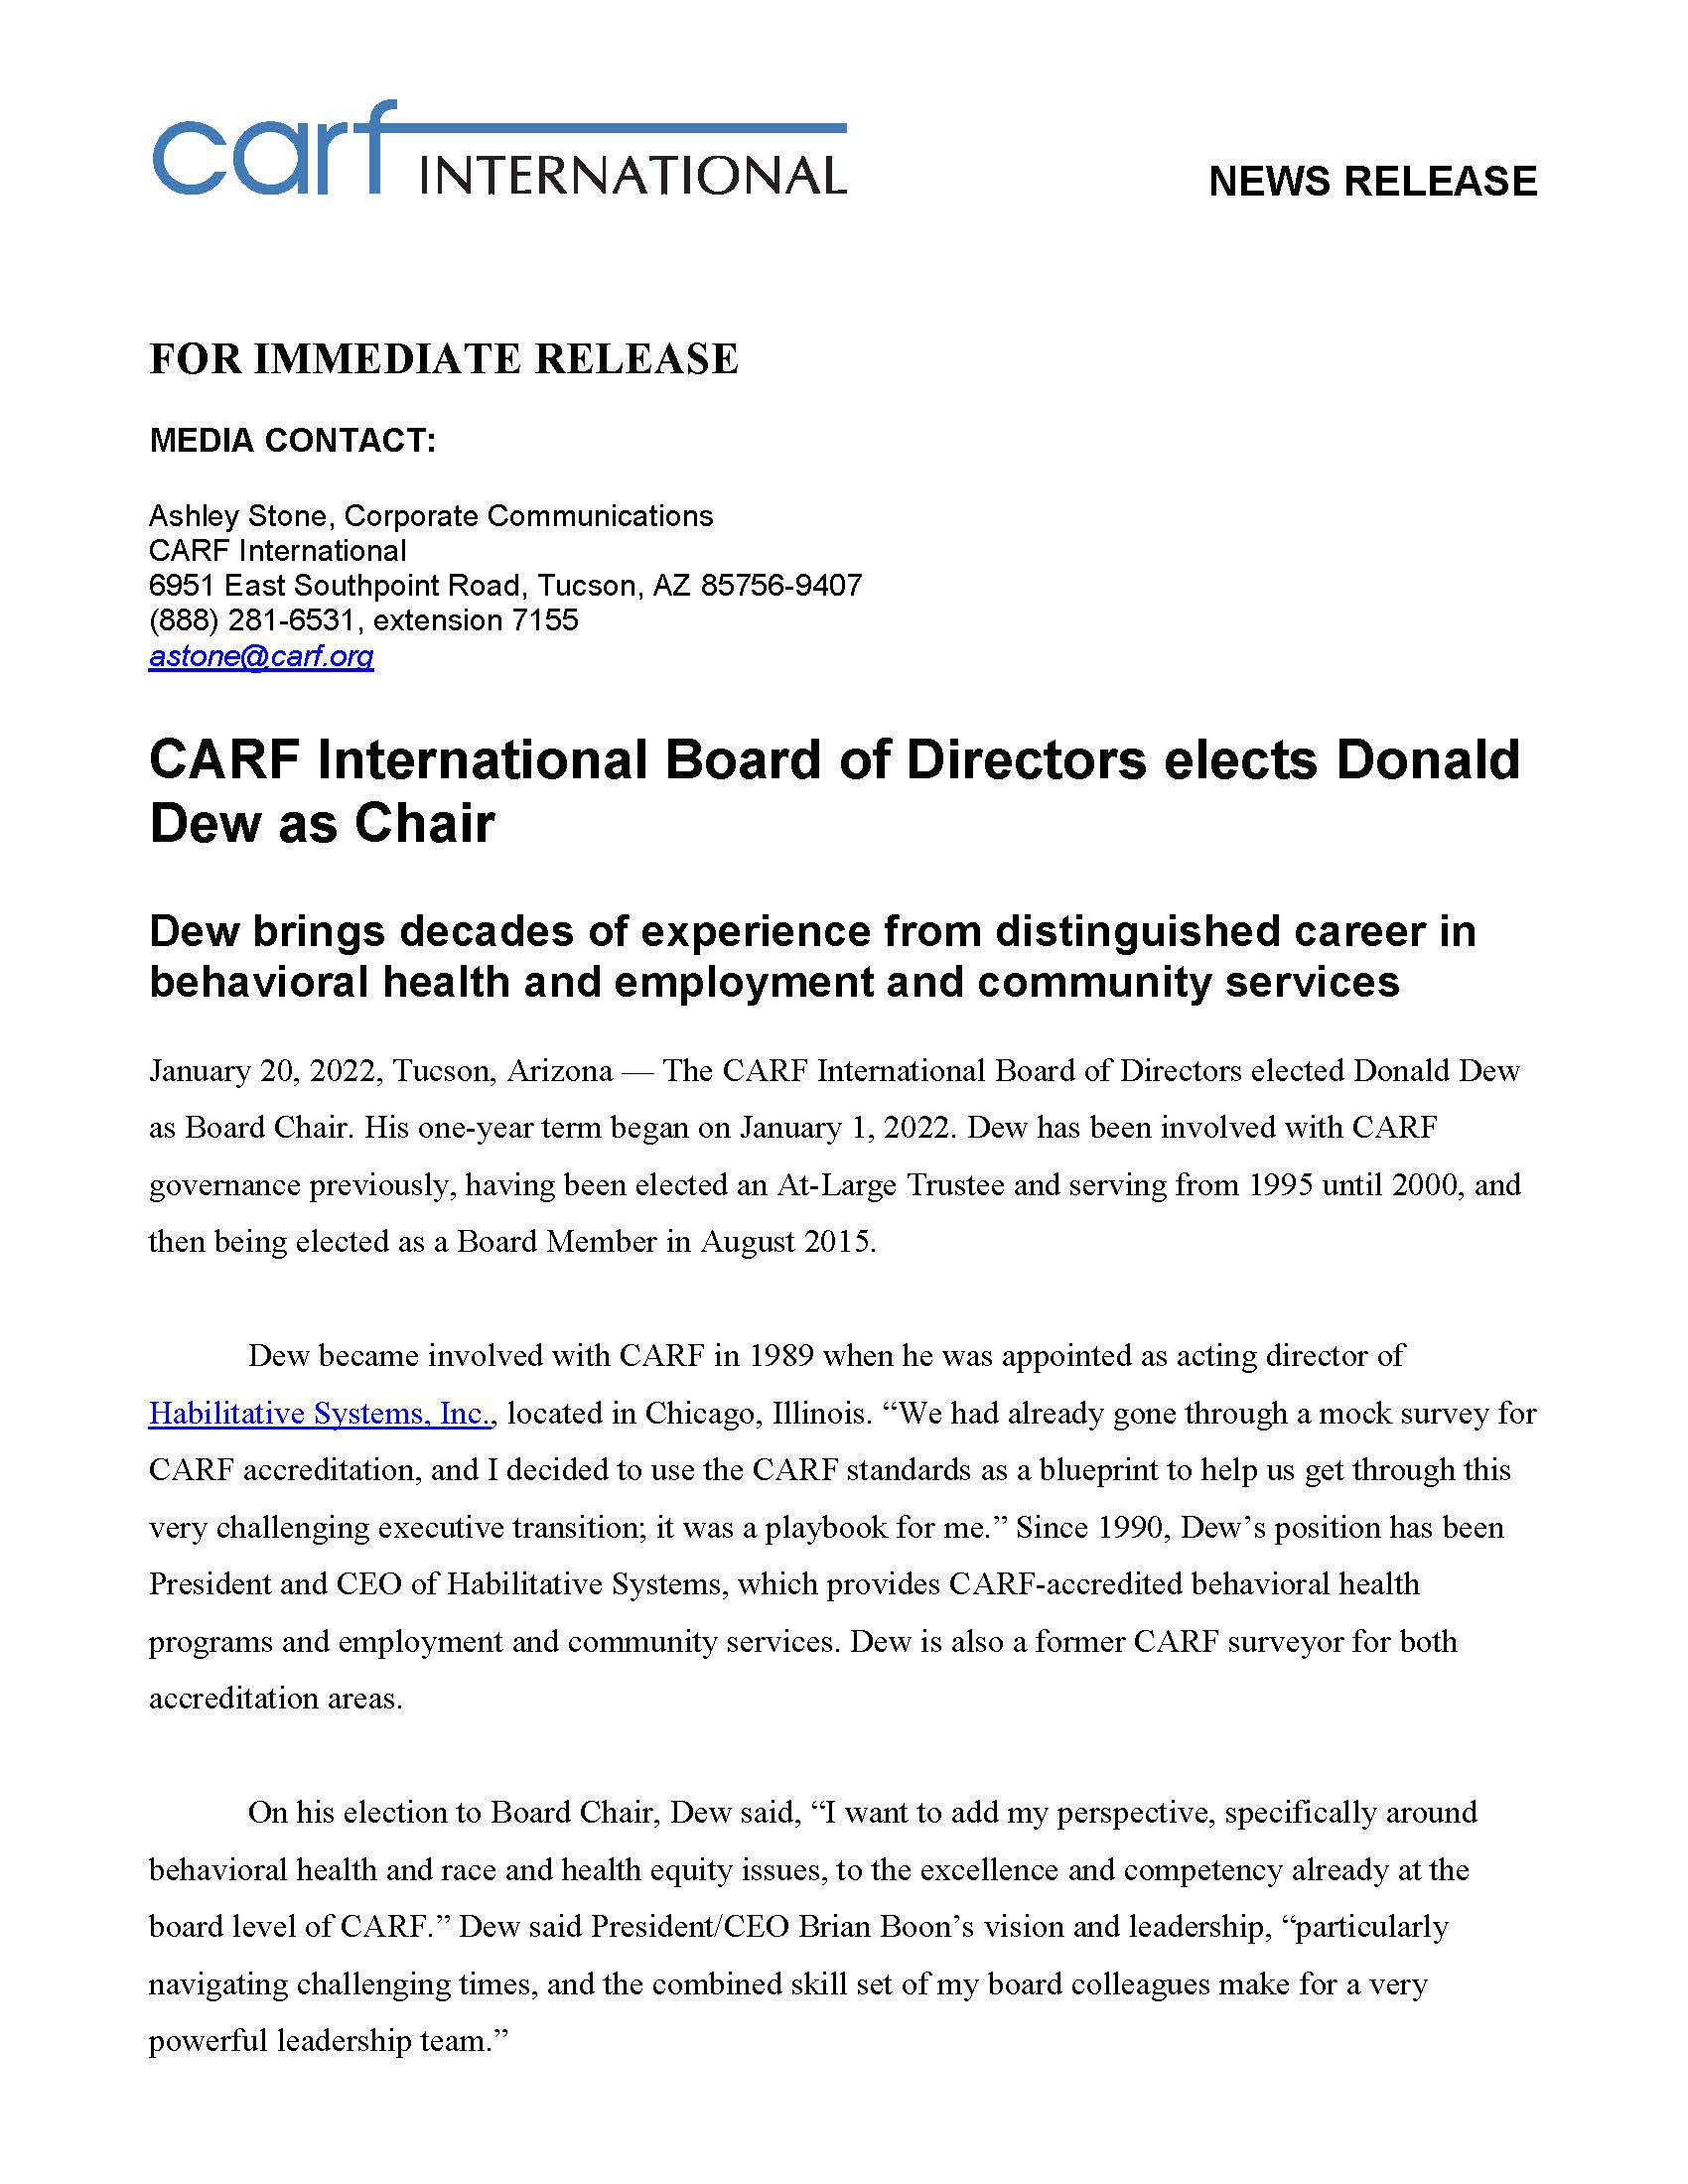 CARF International Board of Directors elects Donald Dew as Chair Page 1